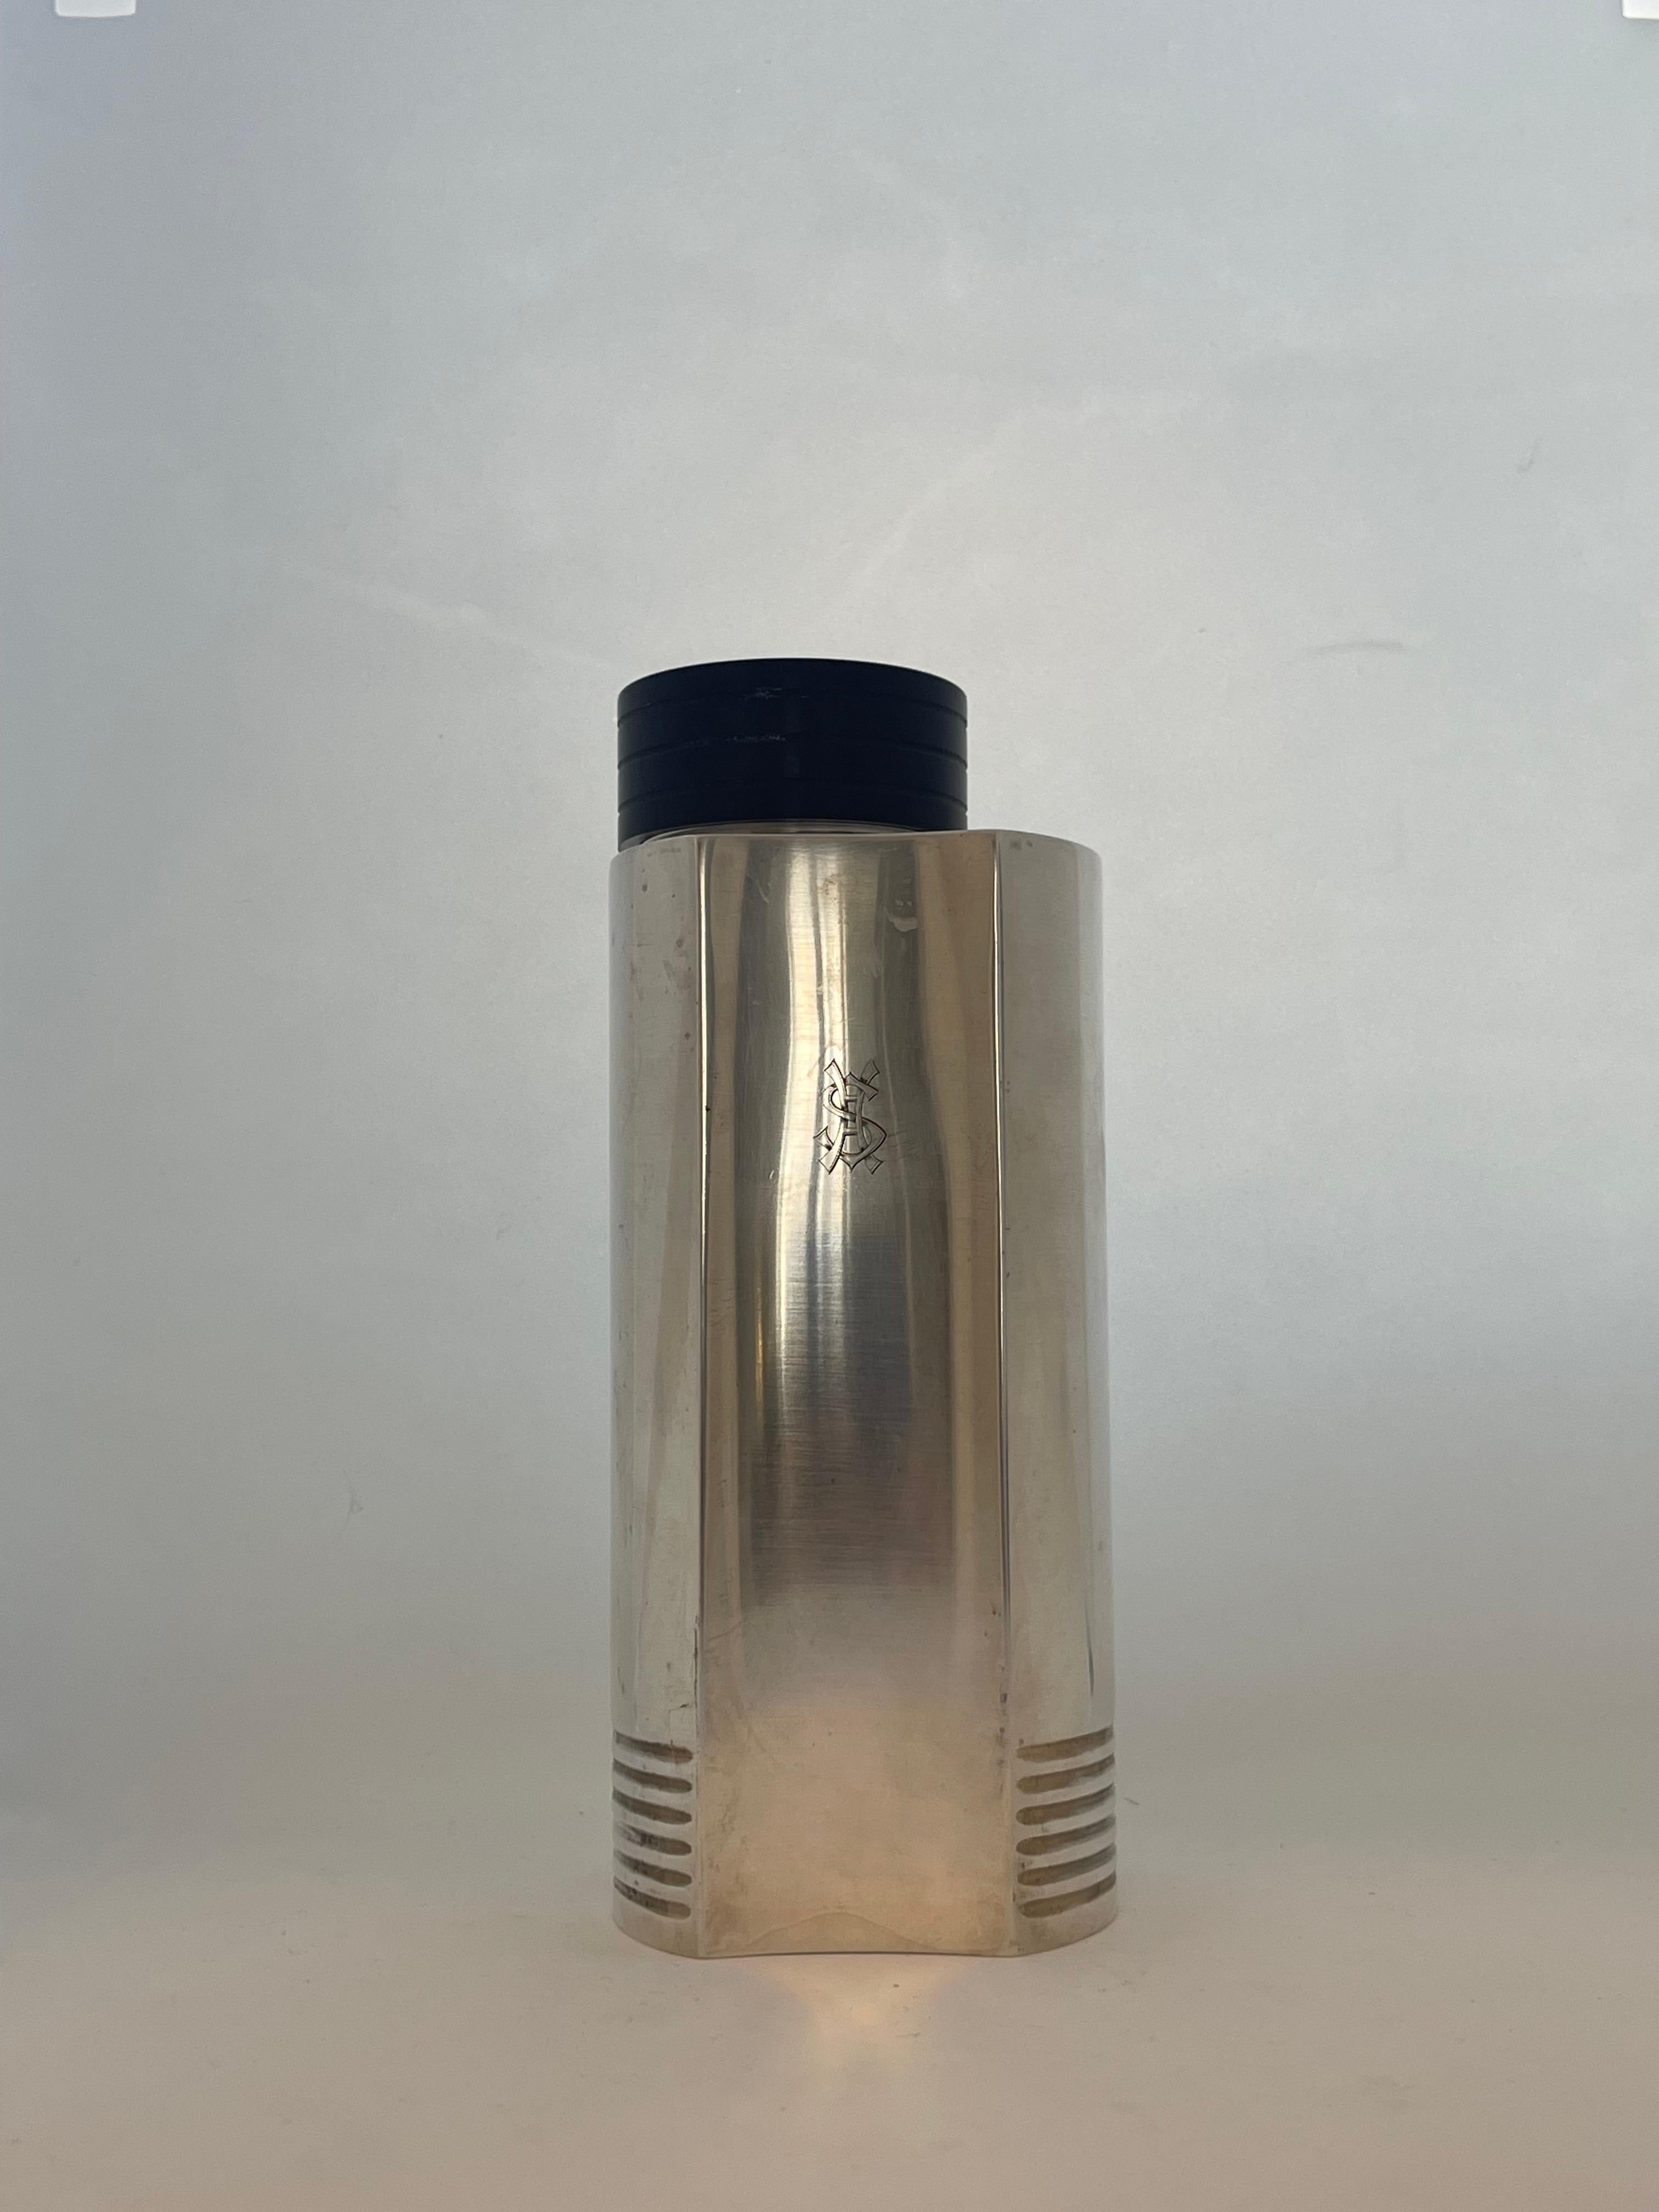 Cocktail Shaker by Folke Arstrom Silver Plated for Gab Sweden, 1930 For Sale 2